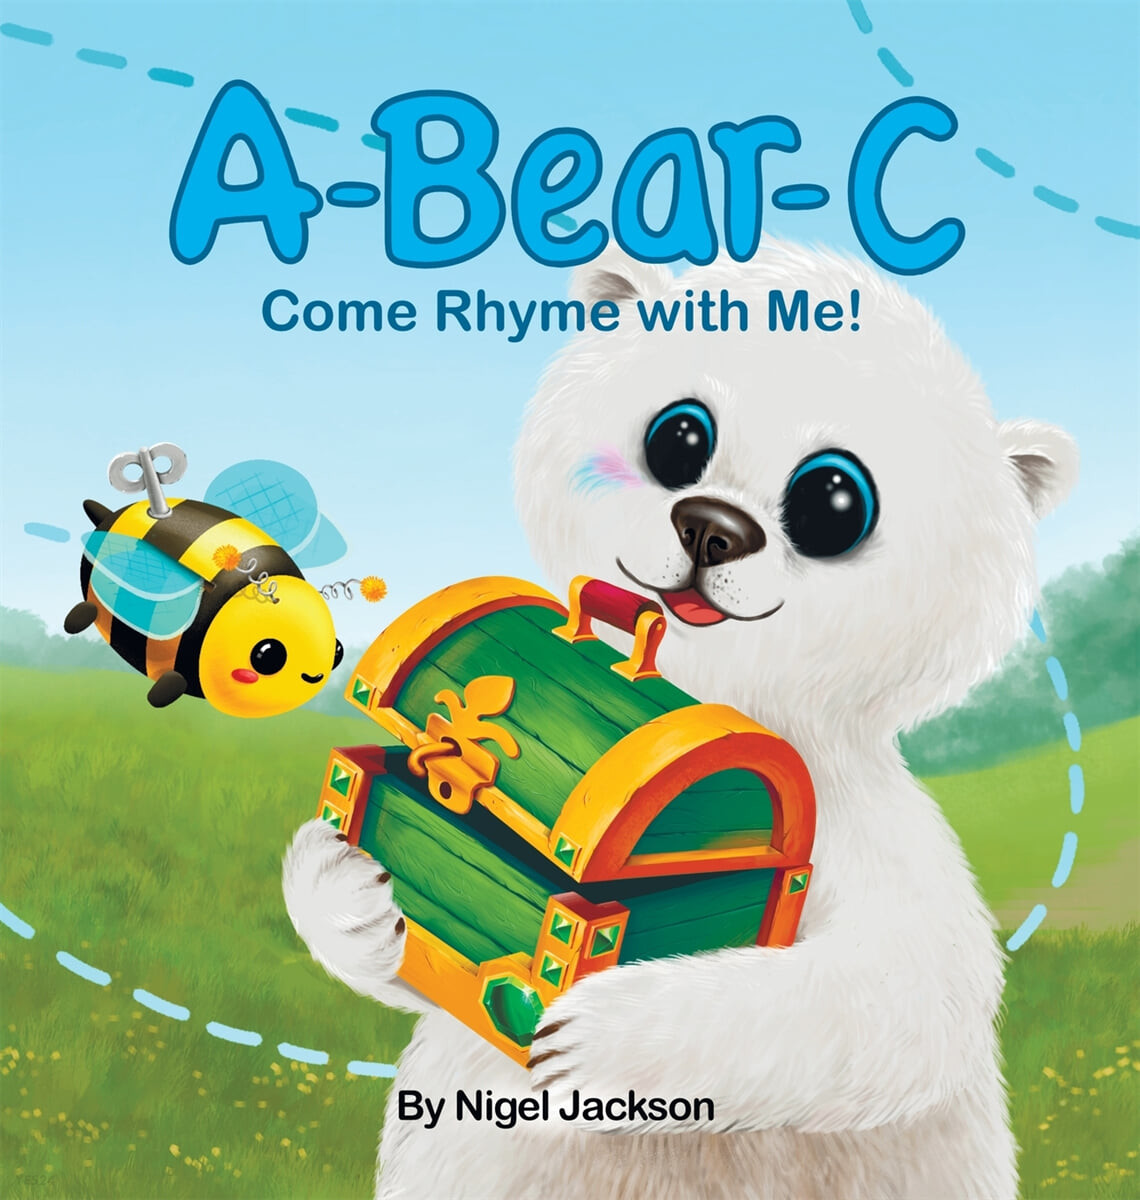 A-Bear-C : Come rhyme with me!